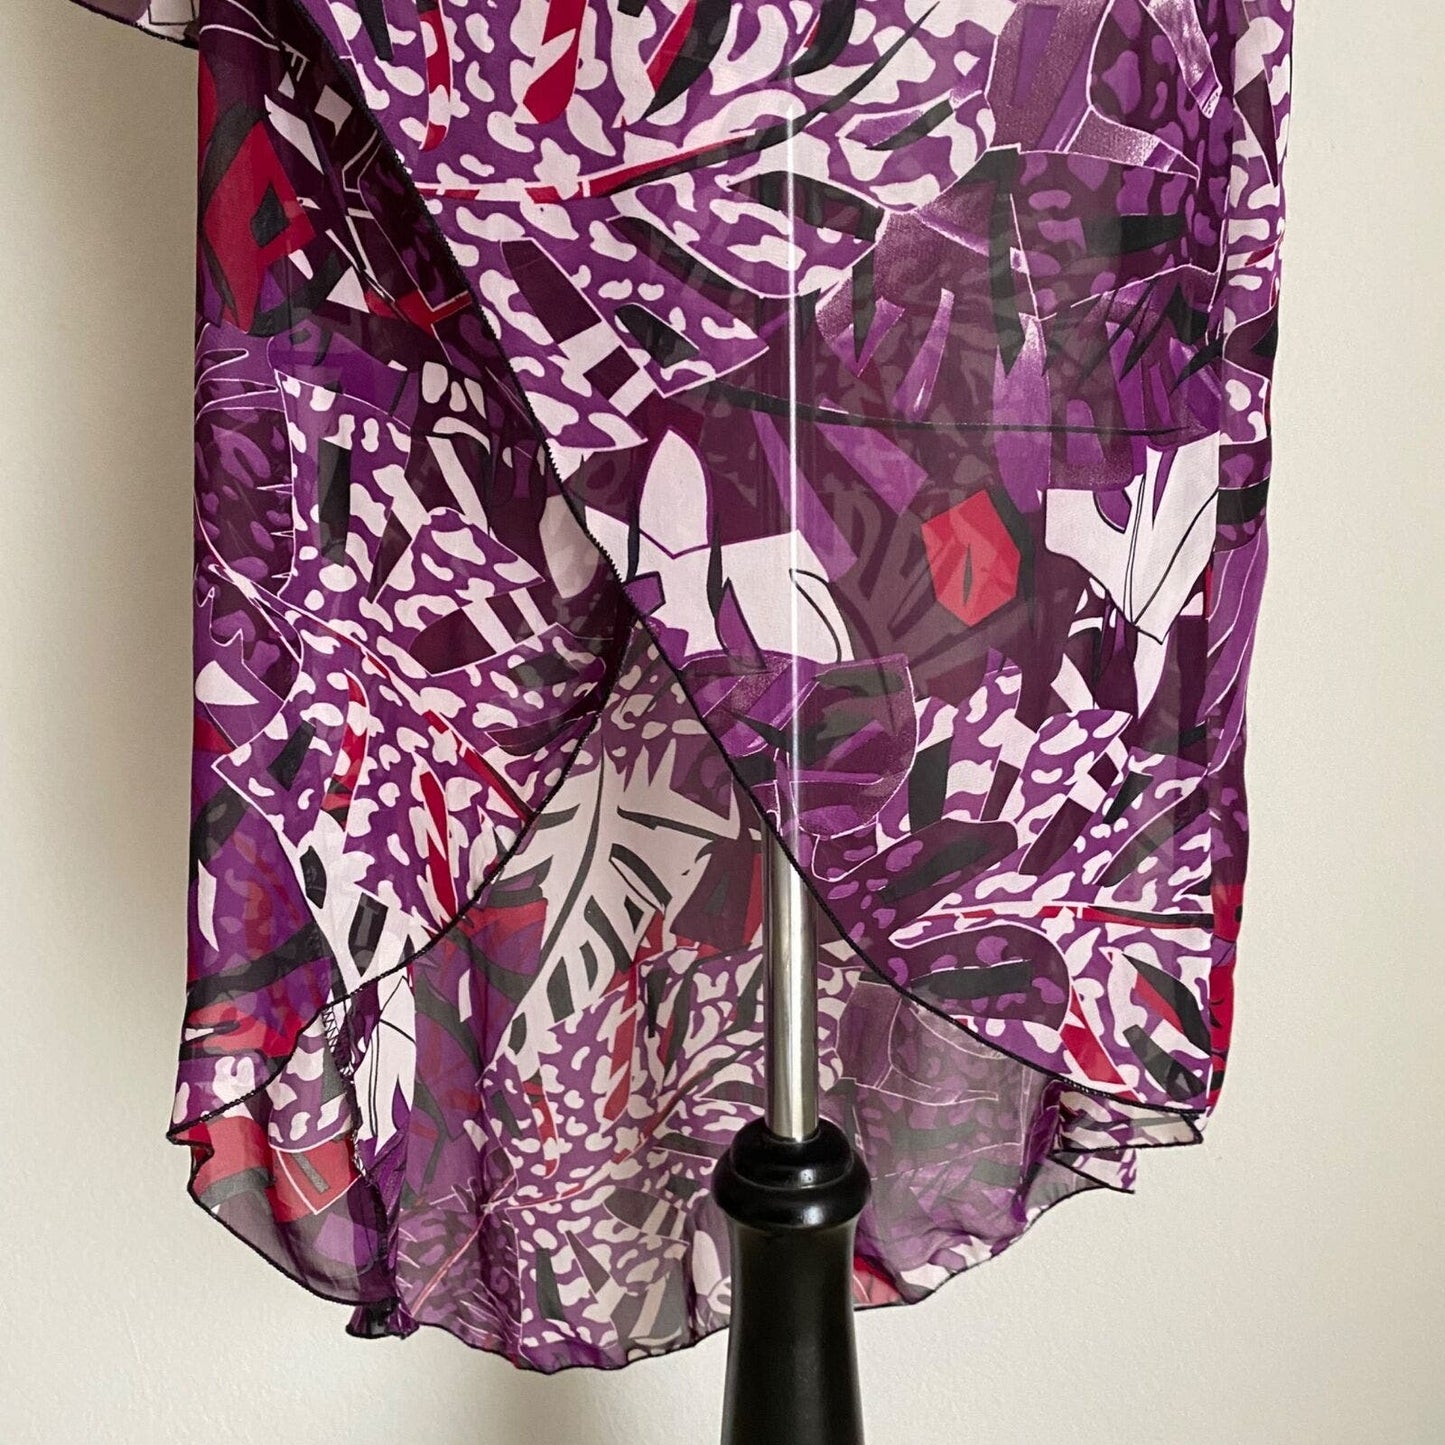 Ashley Stewart sz 18/20 floral vacation cover up faux wrap dress